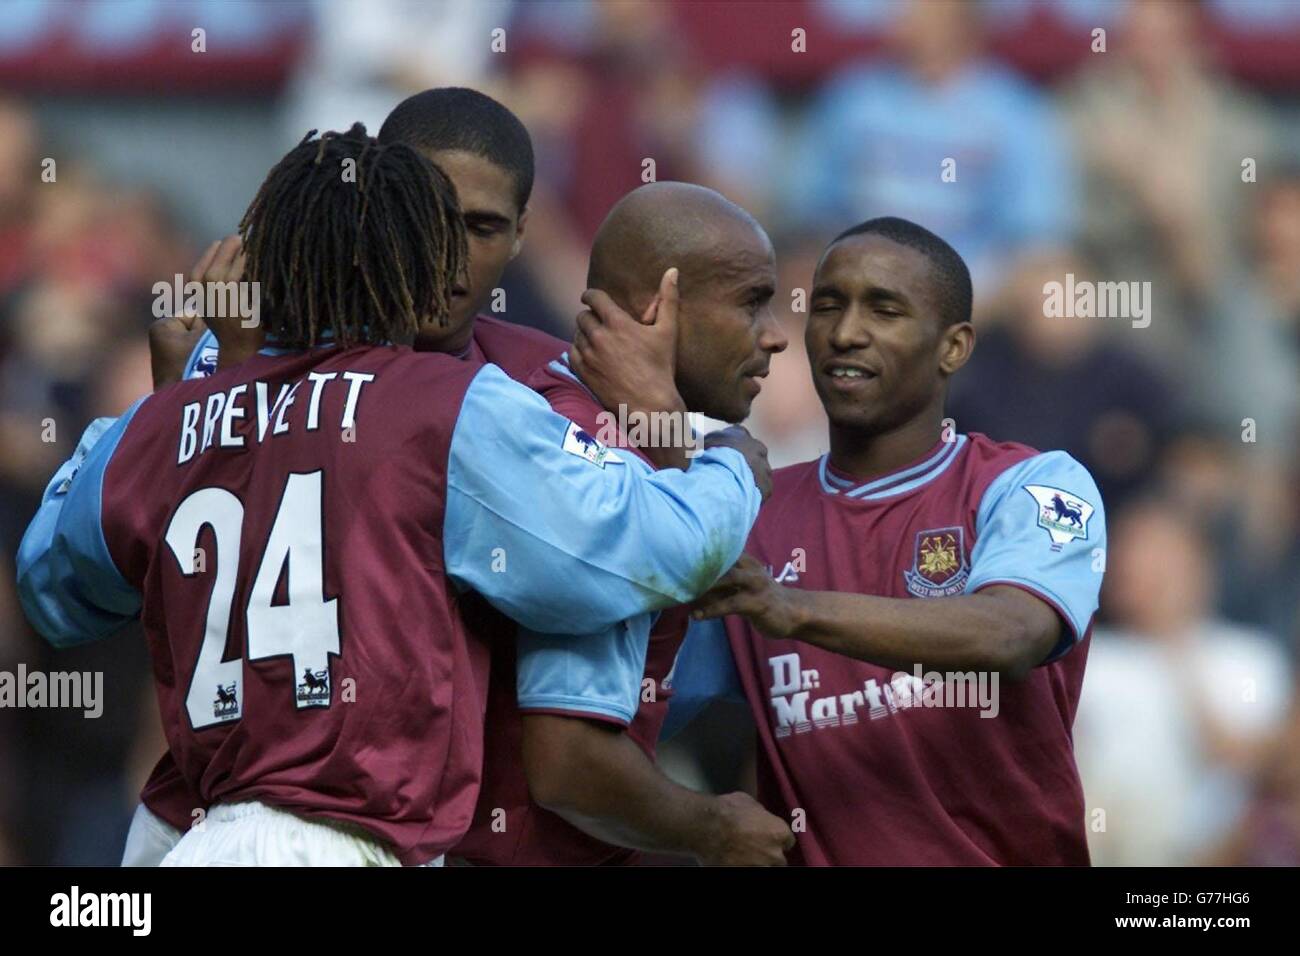 West Ham's Trevor Sinclair (looking right) celebrates his winning goal during the FA Barclaycard Premiership match at the Boleyn Ground, east London. Final score 1-0 to West Ham. Stock Photo